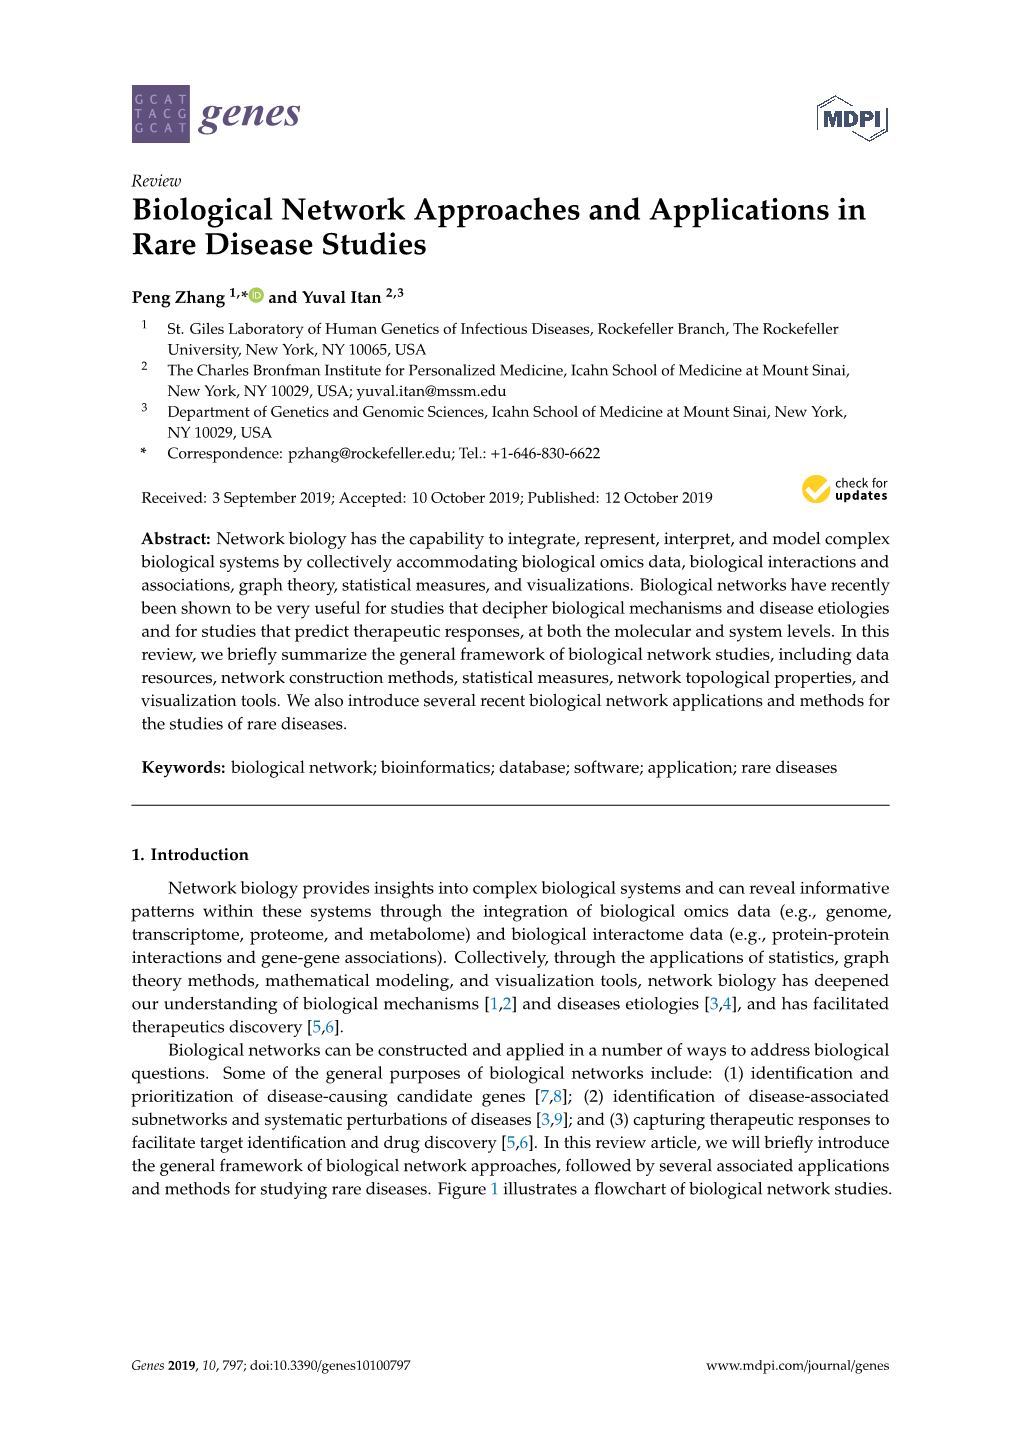 Biological Network Approaches and Applications in Rare Disease Studies